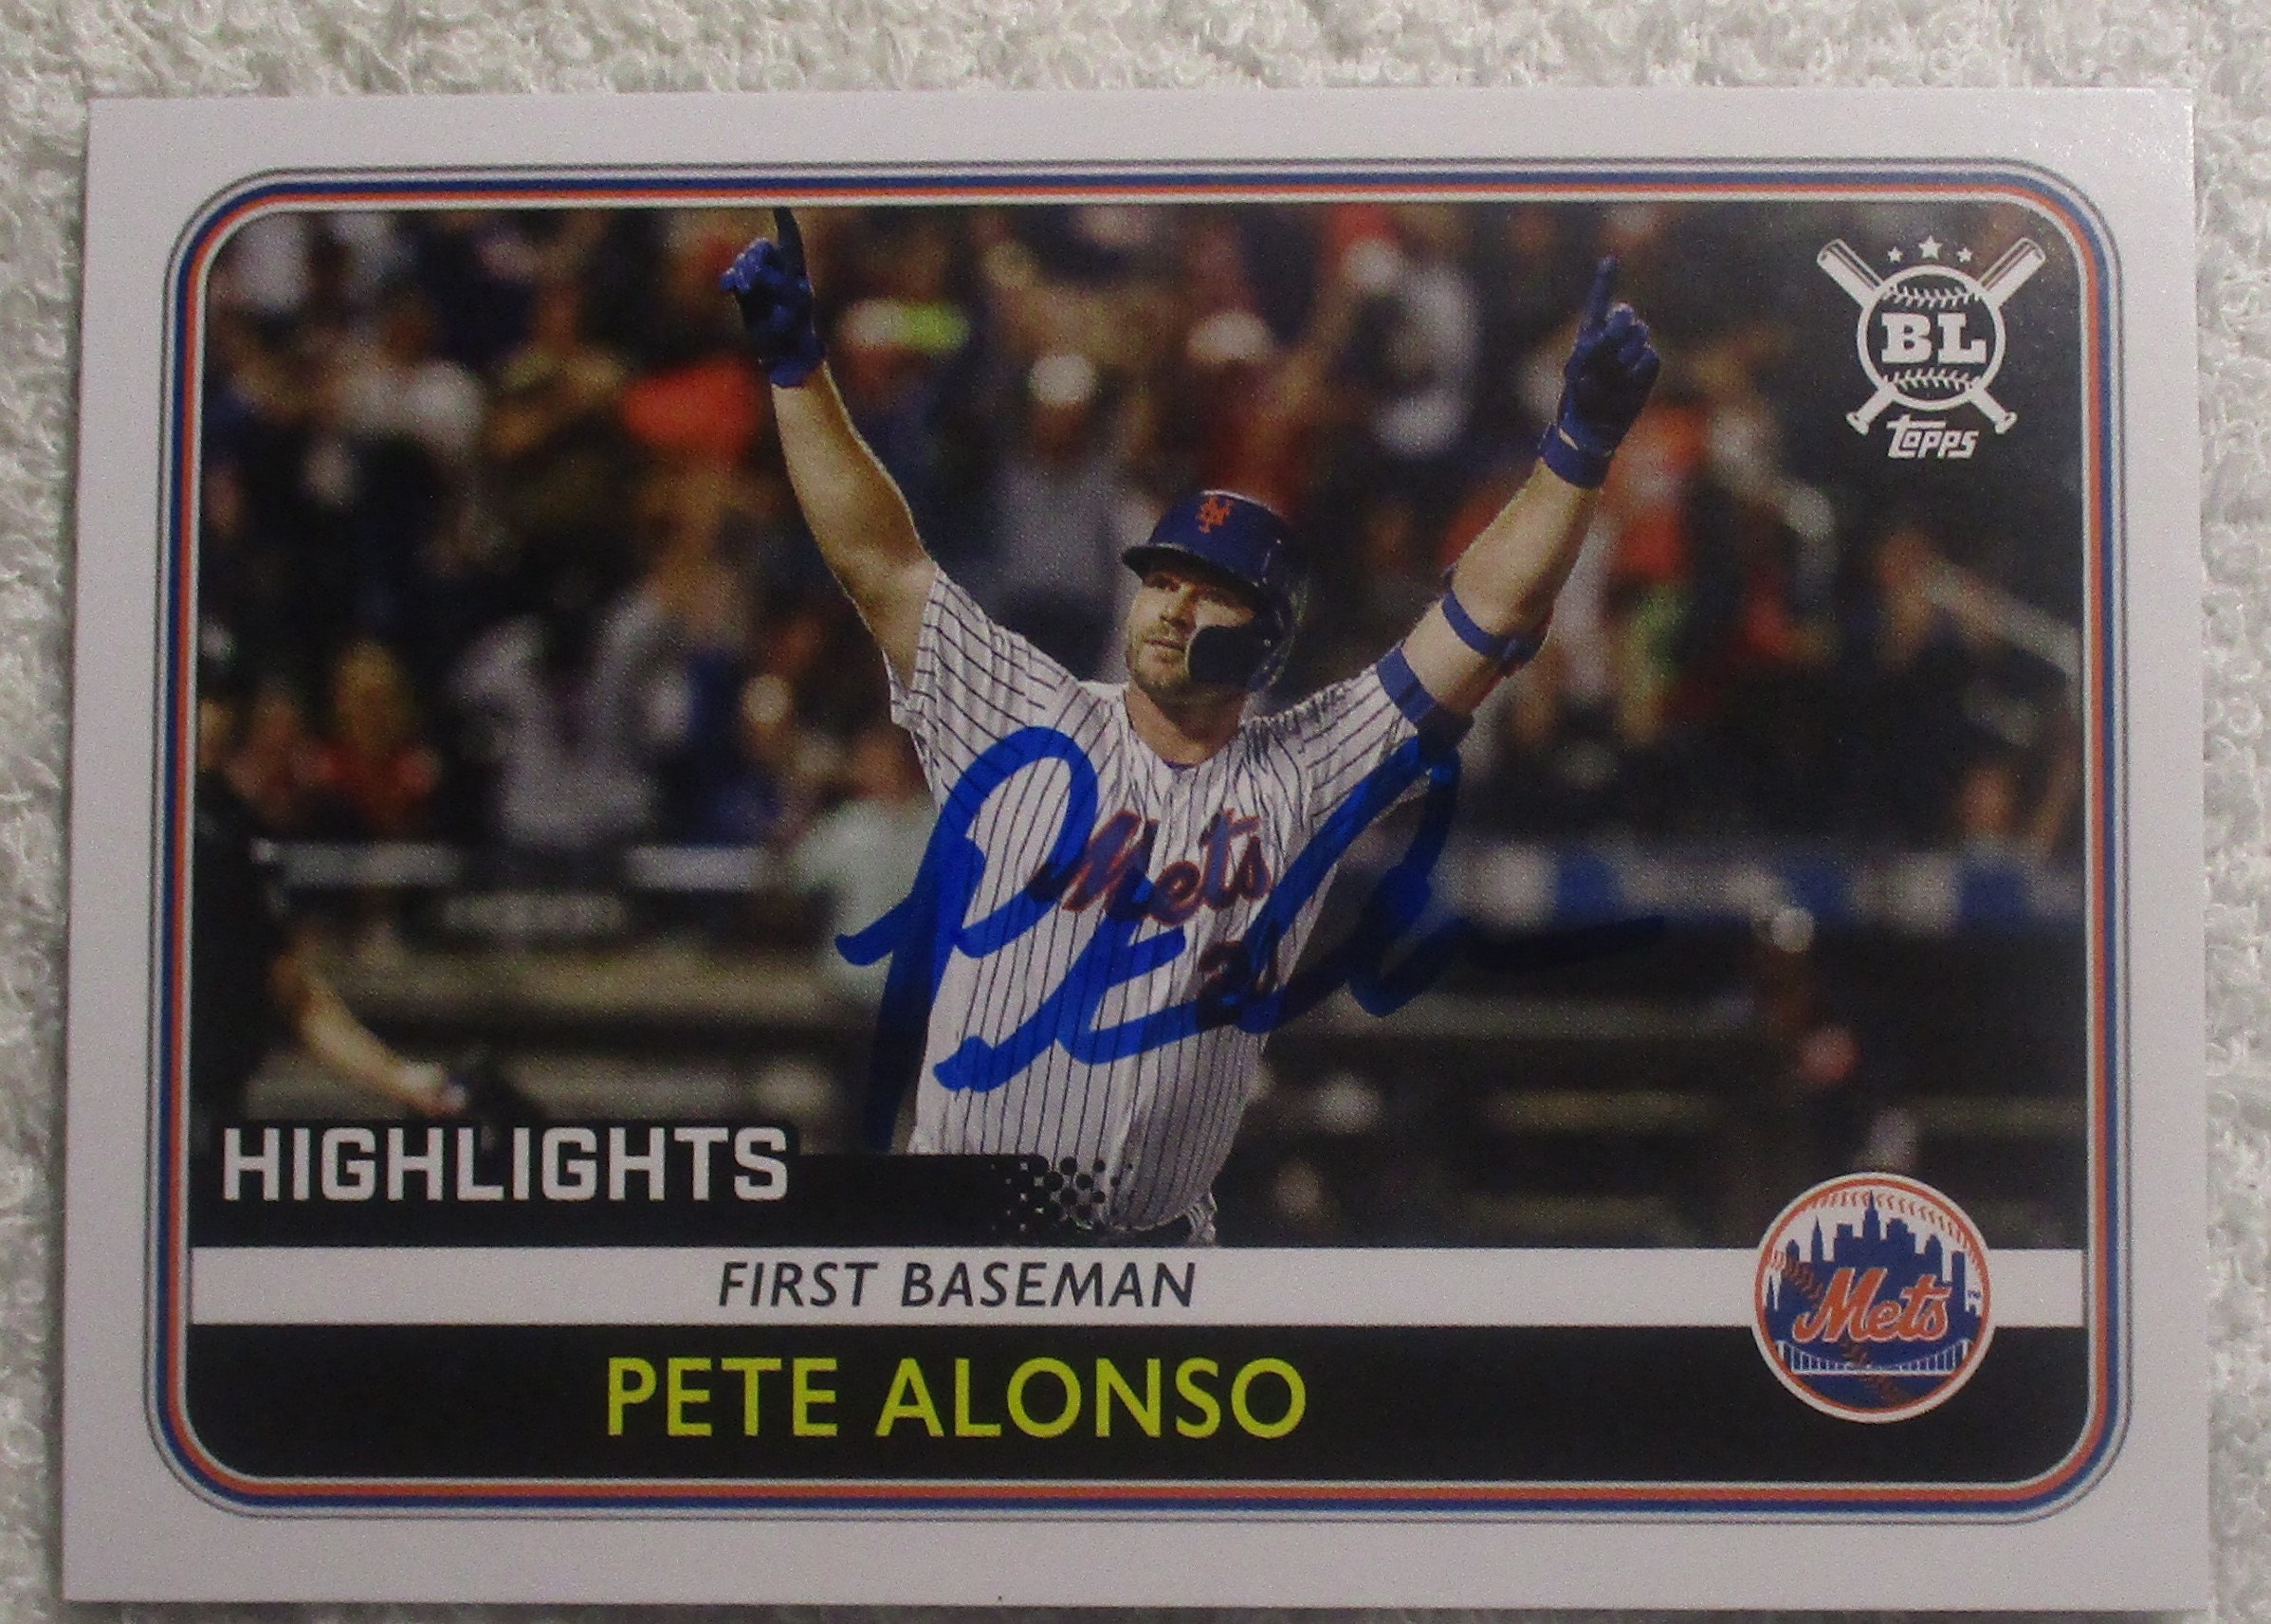 Pete Alonso Highlights Autographed Card Mets No COA